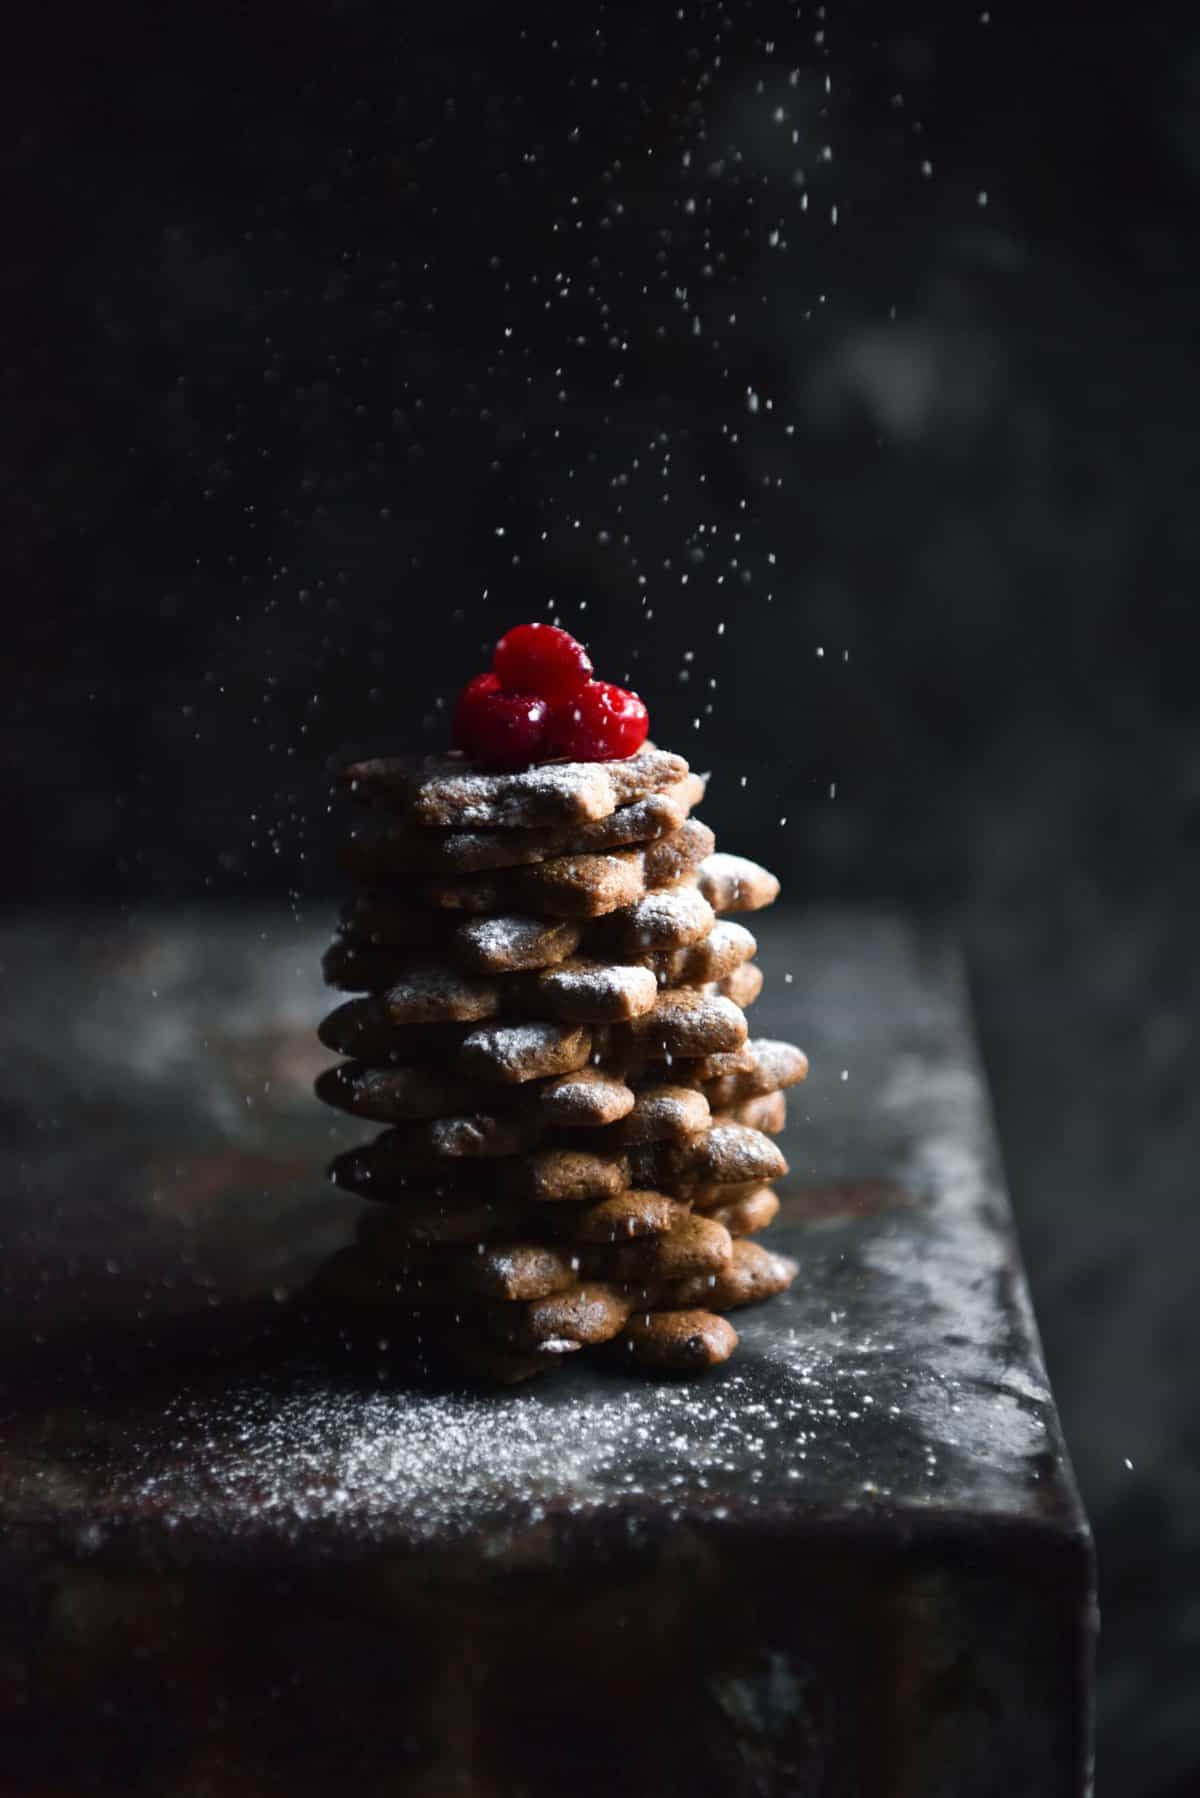 Gluten free gingerbread arranged to look like a mini Christmas tree against a dark and moody backdrop